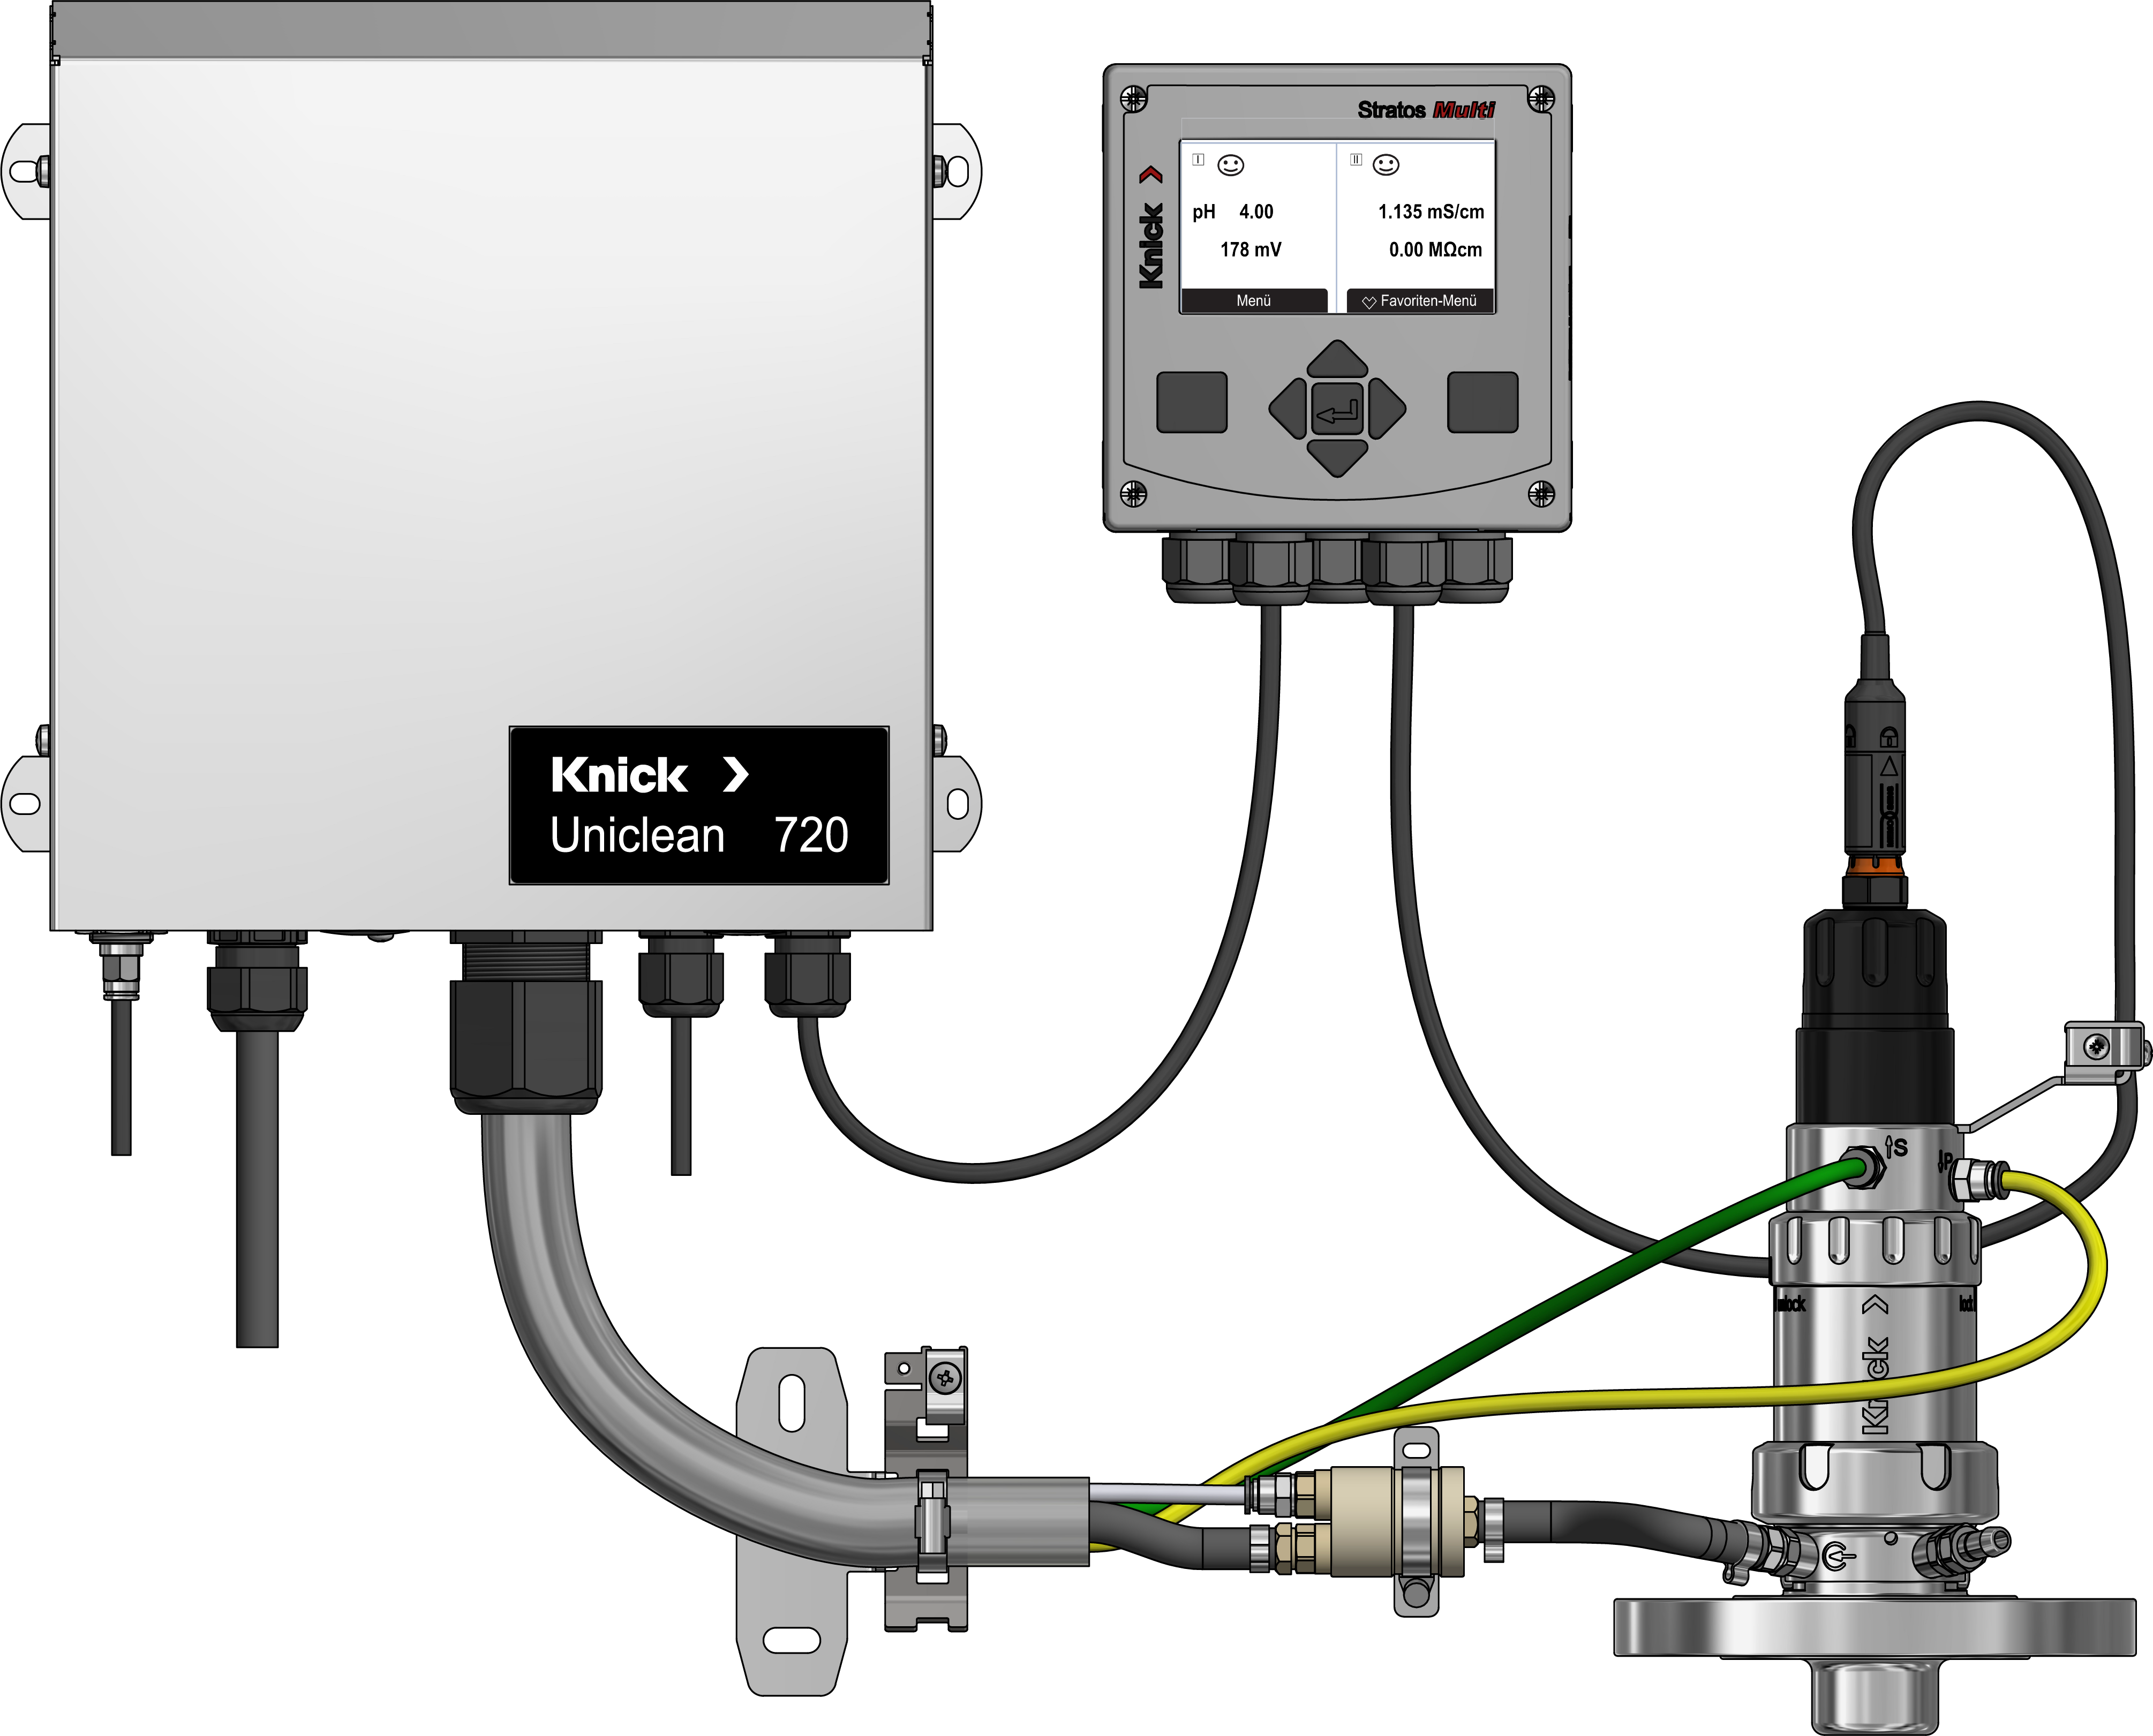 Uniclean 700 - Modular Control System for Measuring Loops